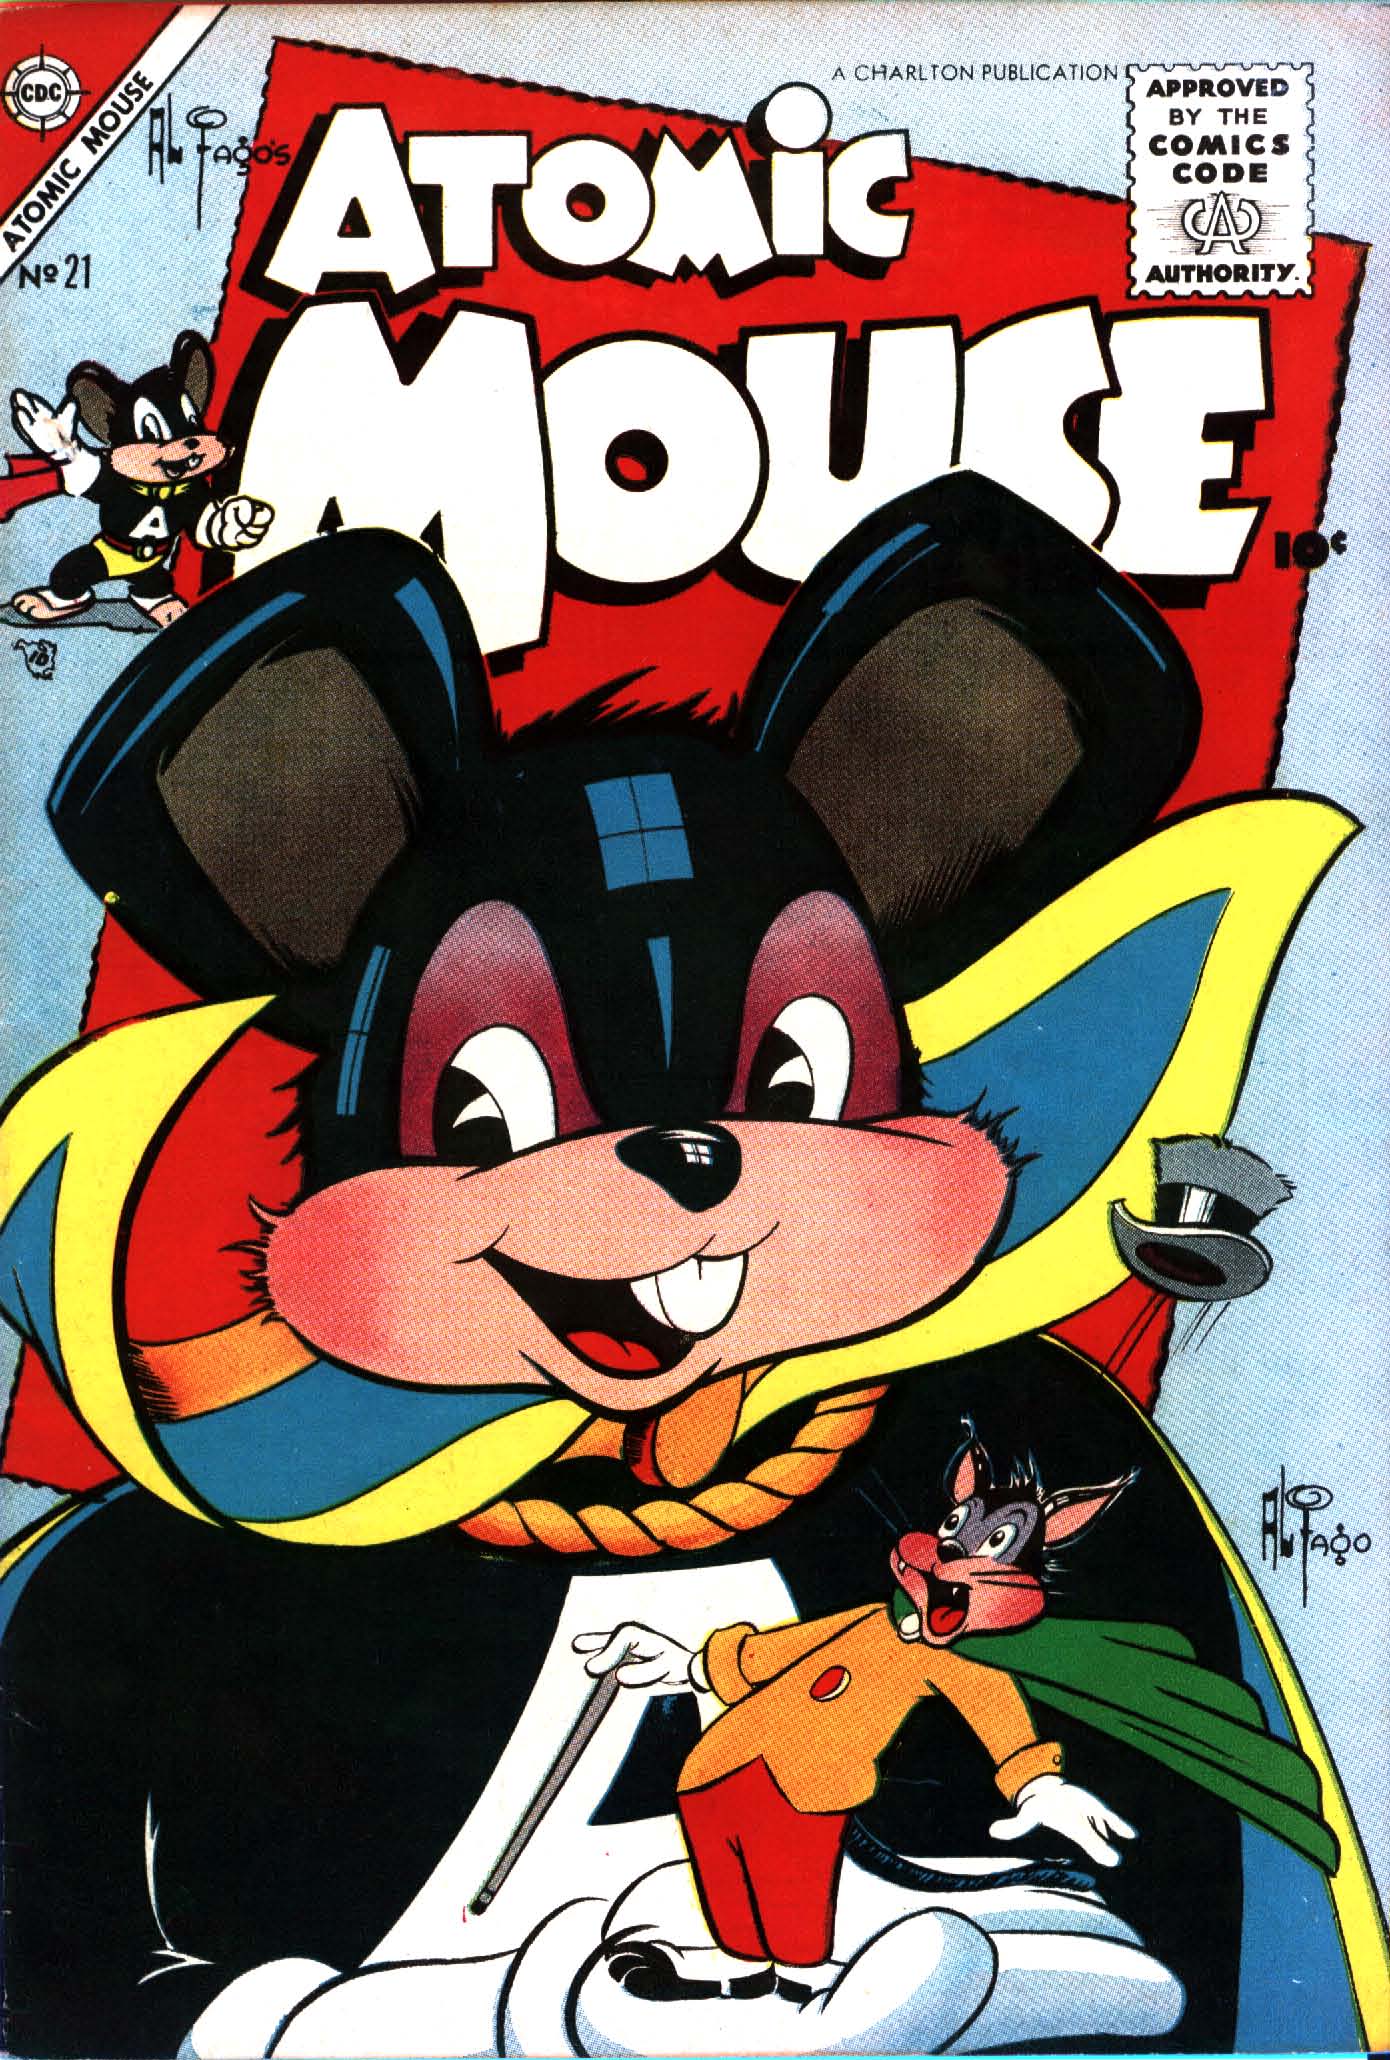 Read online Atomic Mouse comic -  Issue #21 - 1